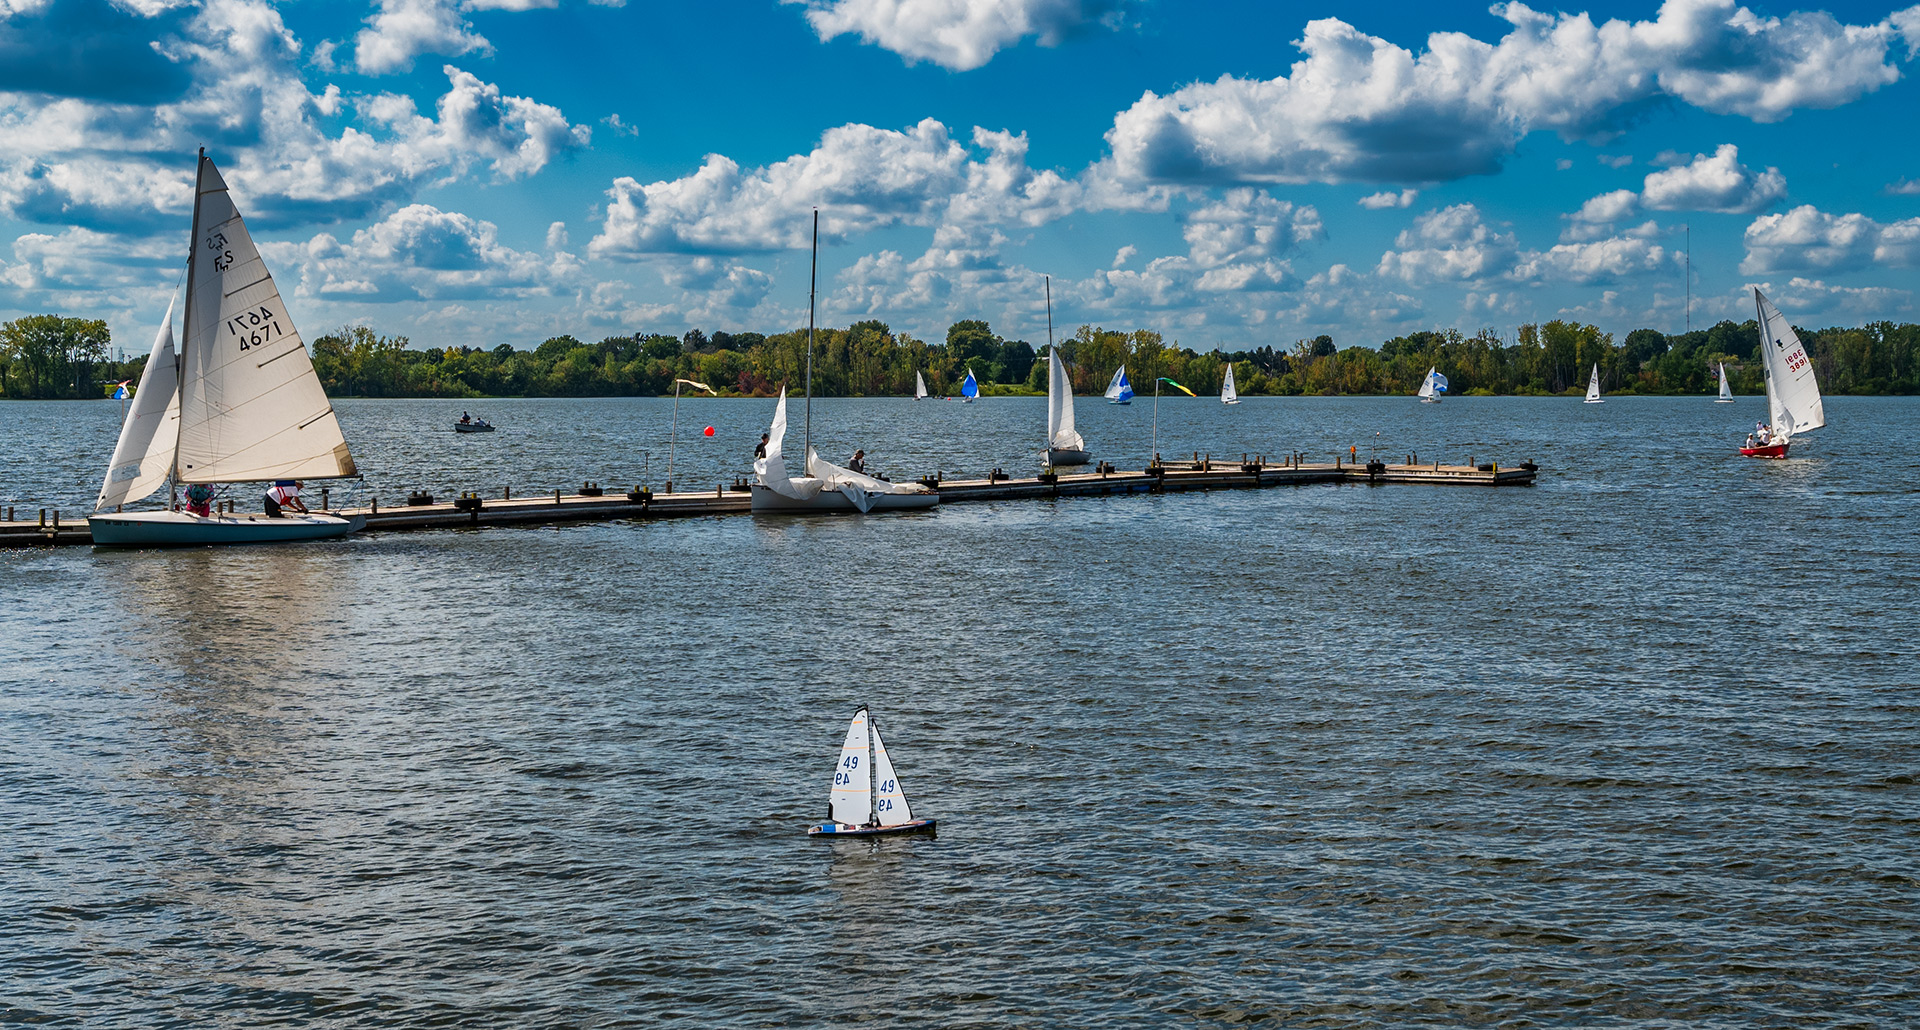 An electric-powered model sailboat travels past its larger cousins as it navigates the waters near the shoreline and docks at Hoover Sailing Club on Hoover Reservoir. My Final Photo for September 3, 2023.